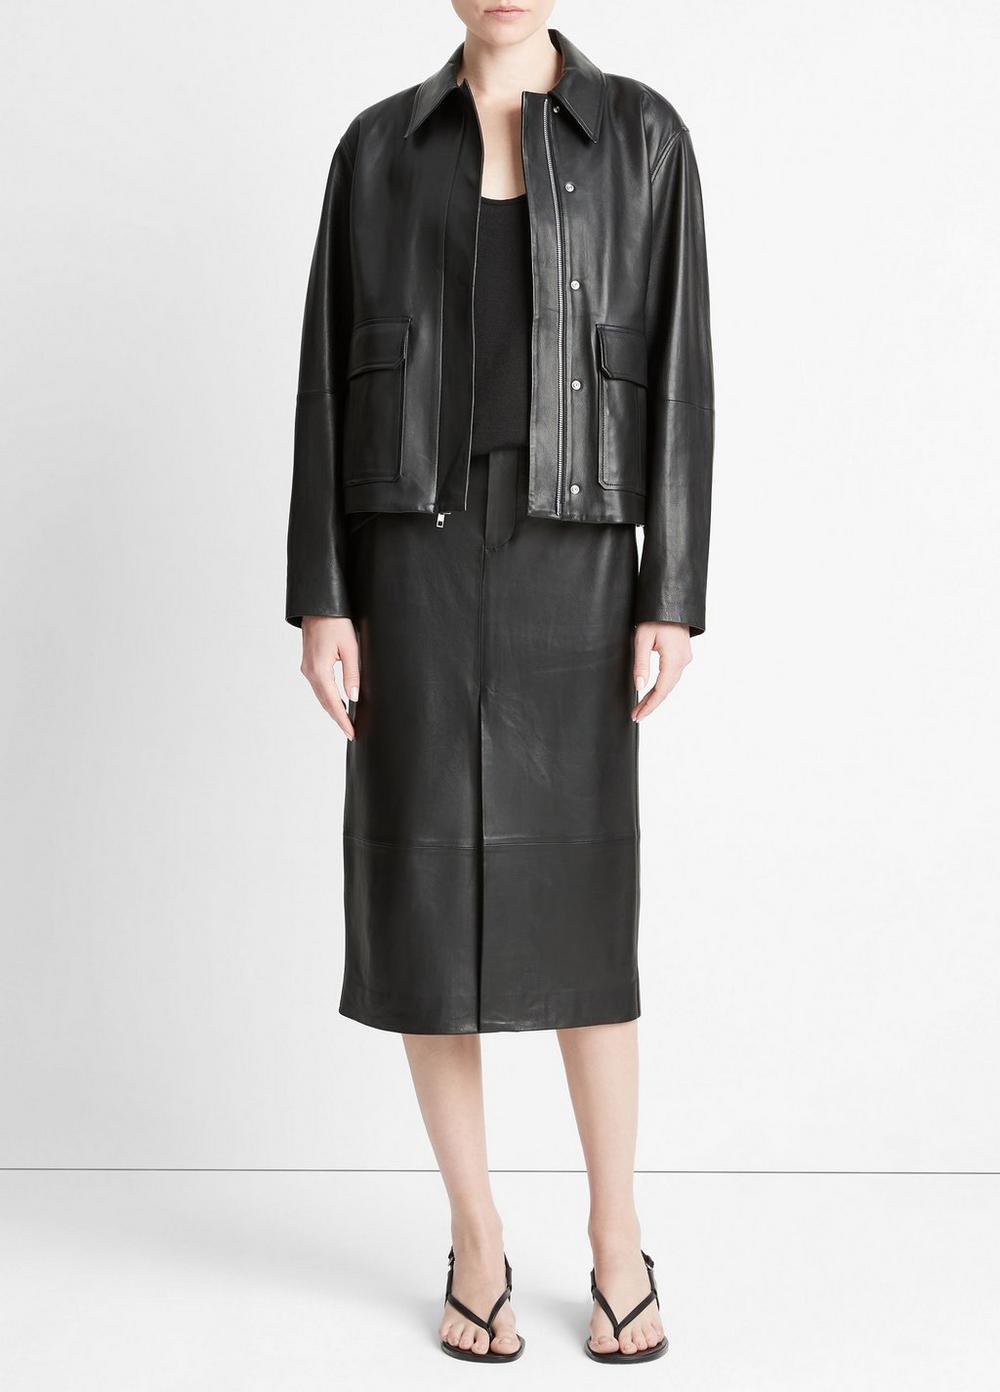 Vince Drape Front Feather Leather Jacket in Black